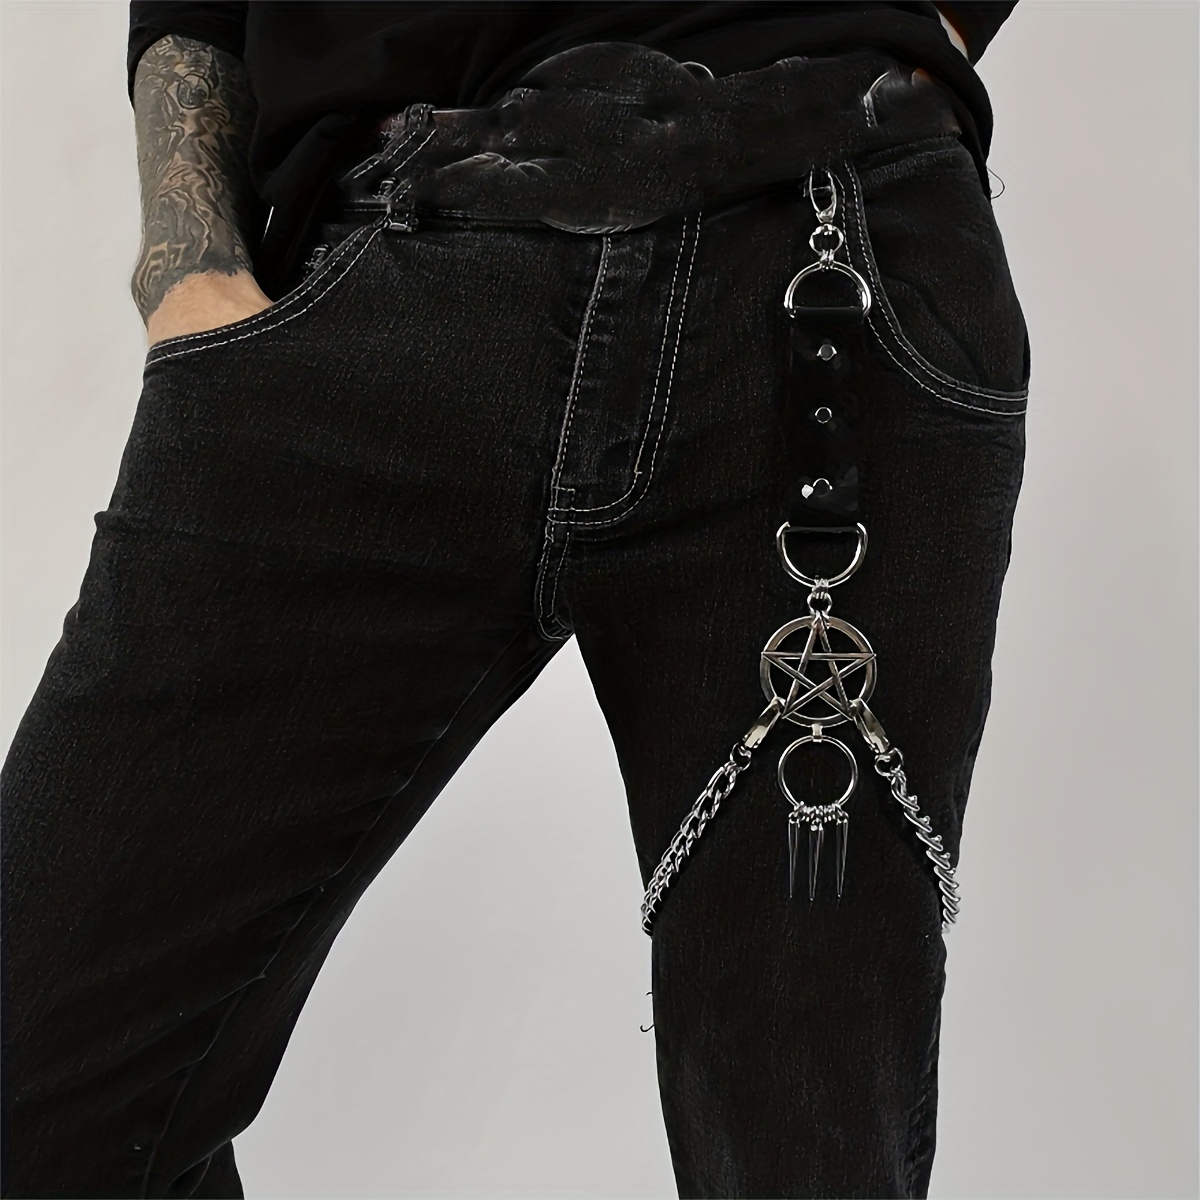 ARZASGO Unisex Punk Chains for Pants, Heavy Duty Multi-layer Belt Chains  Hip Hop Trousers Jeans Chain with Lobster Clasps for Wallet Keys at   Men's Clothing store